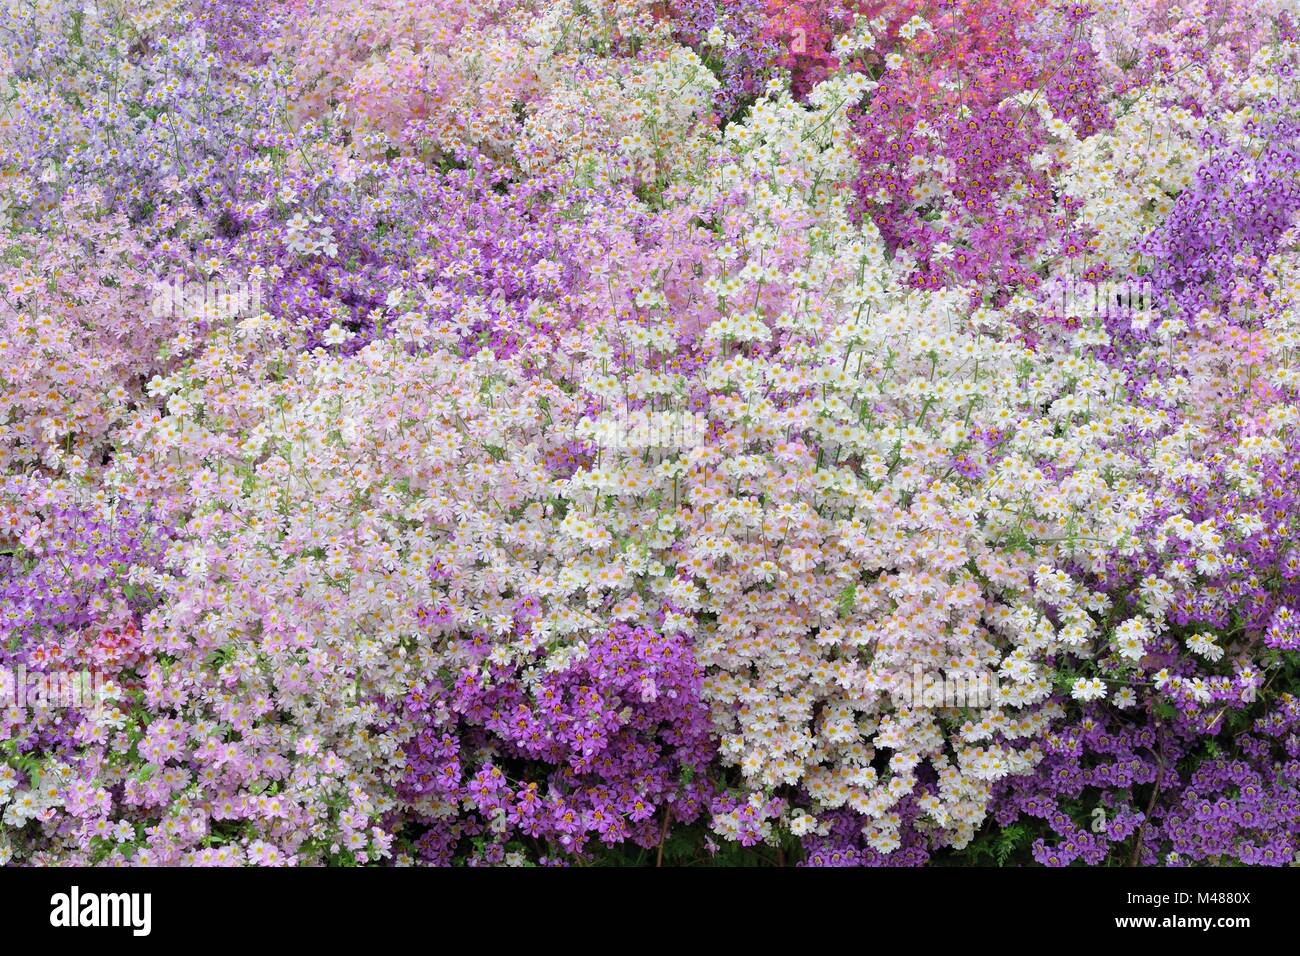 Mass of poor mans Orchidsof purple and white Stock Photo